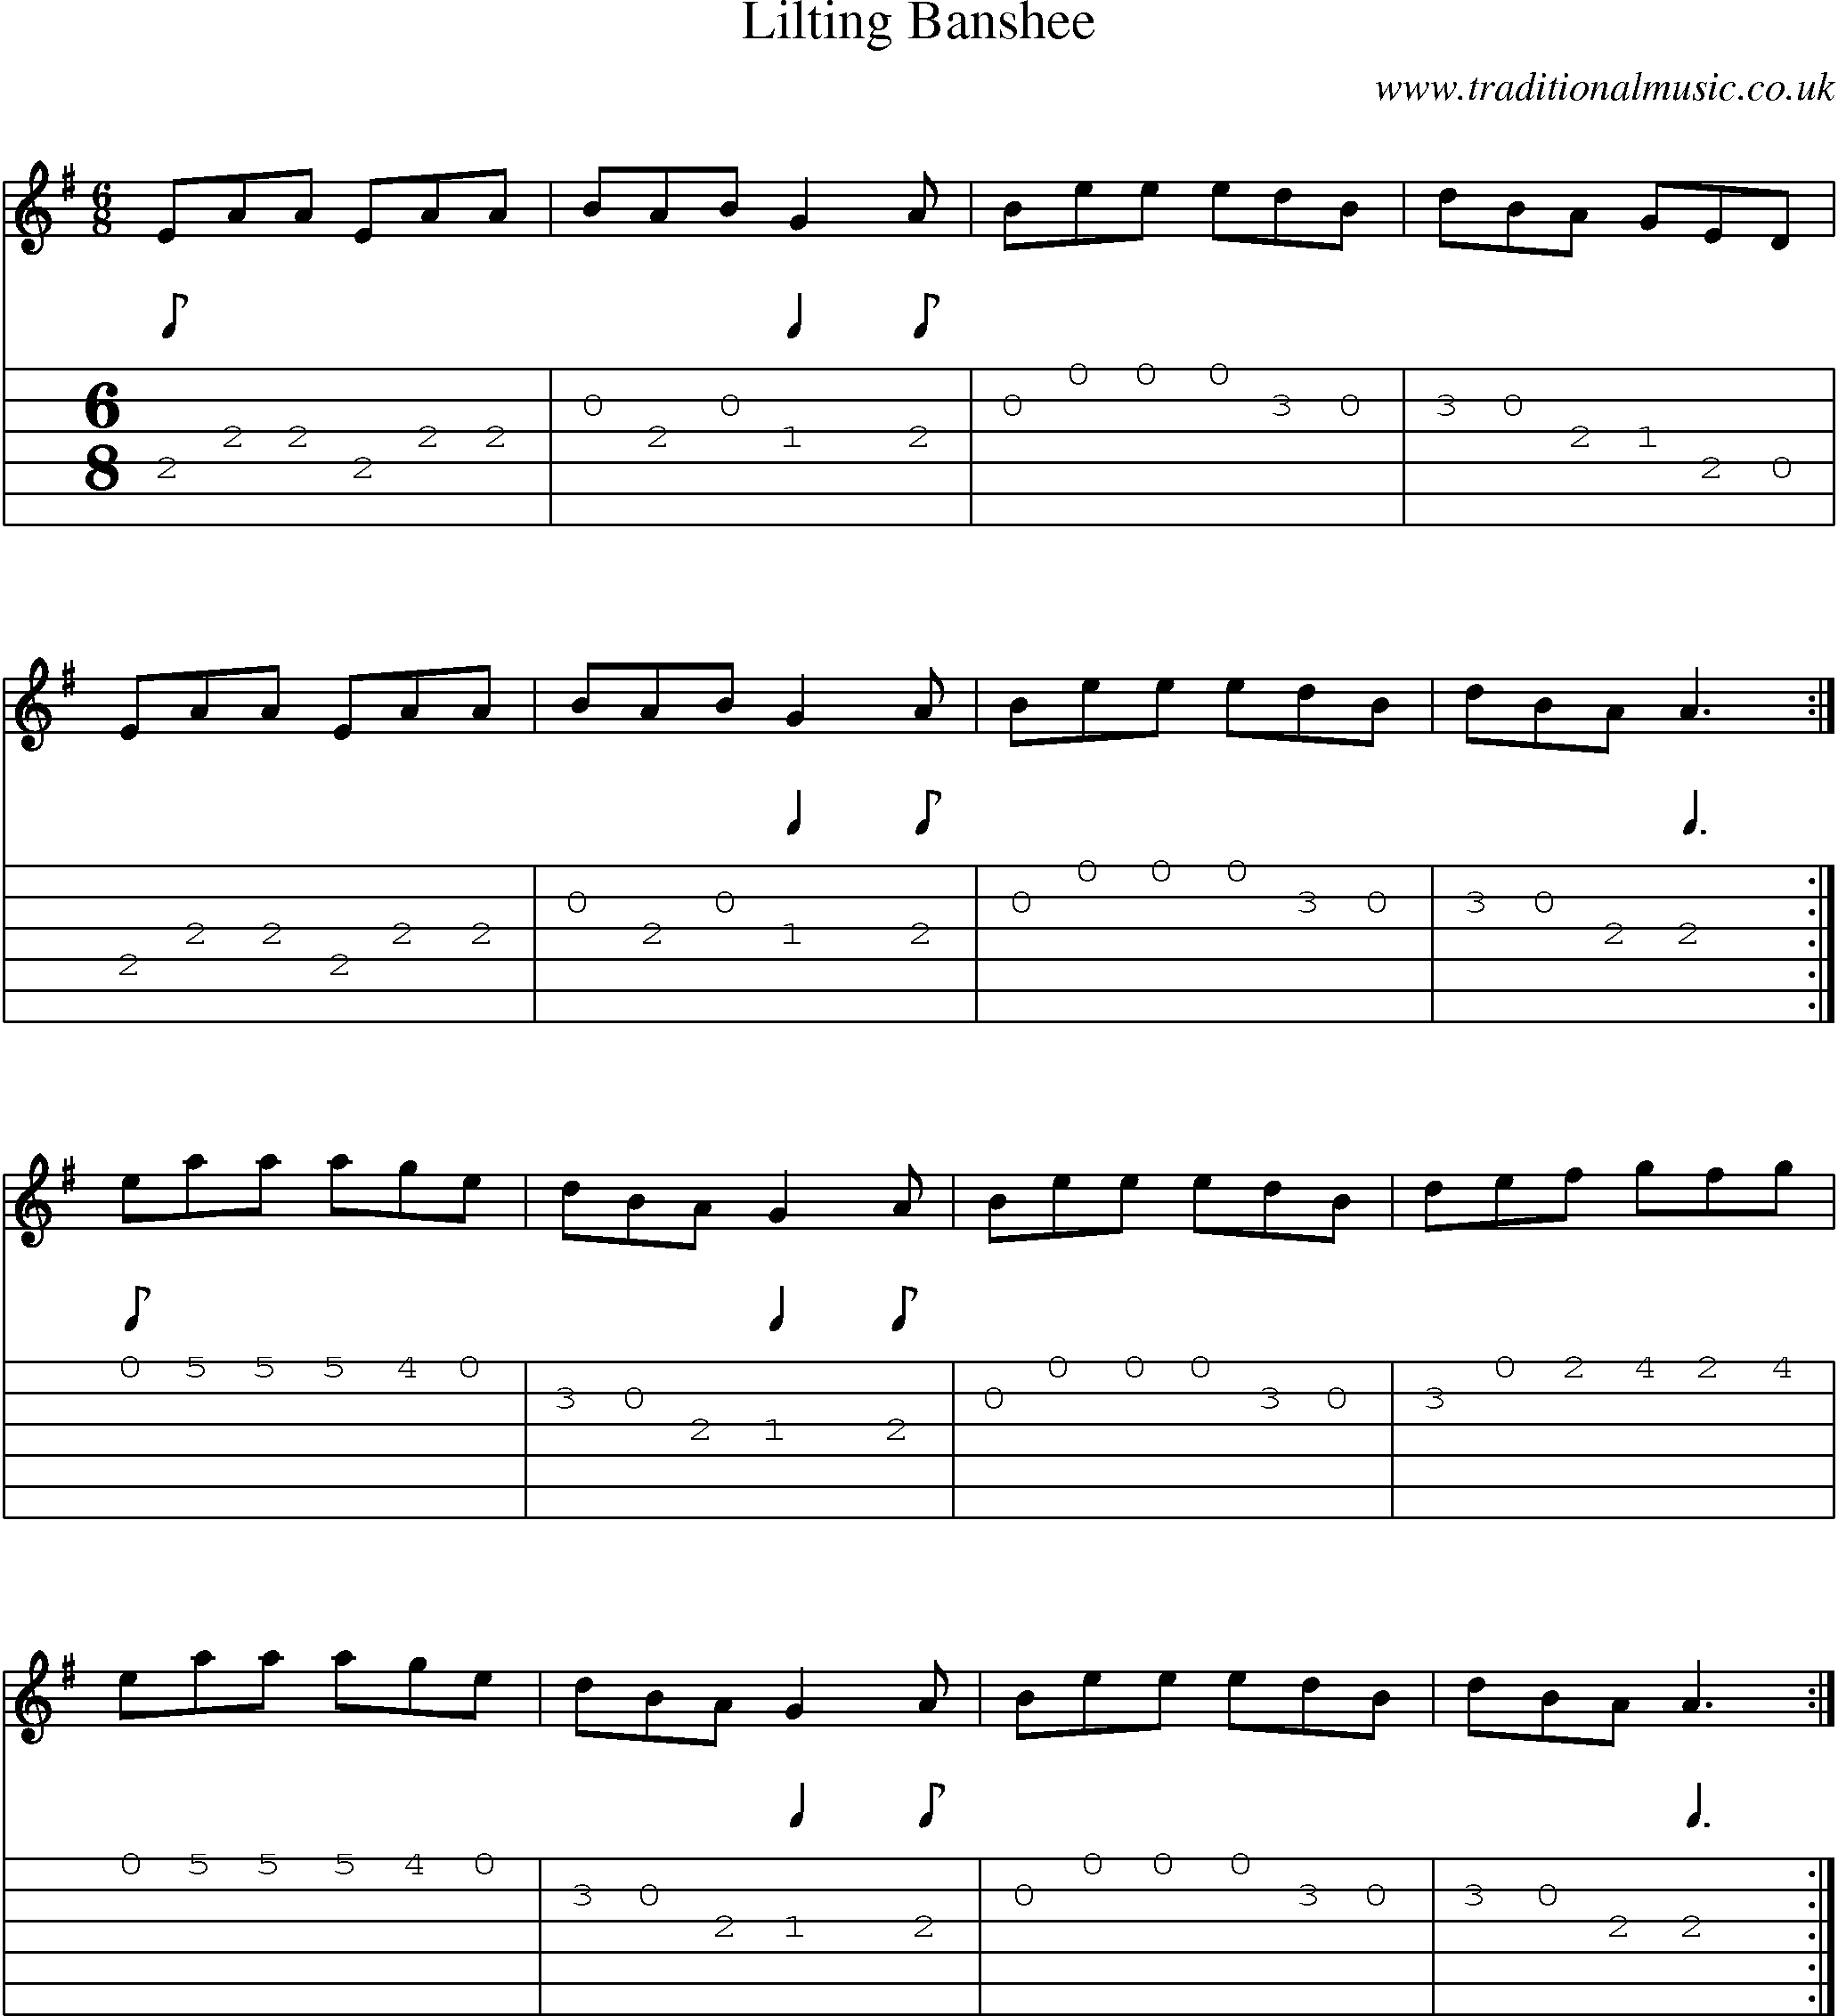 Music Score and Guitar Tabs for Lilting Banshee